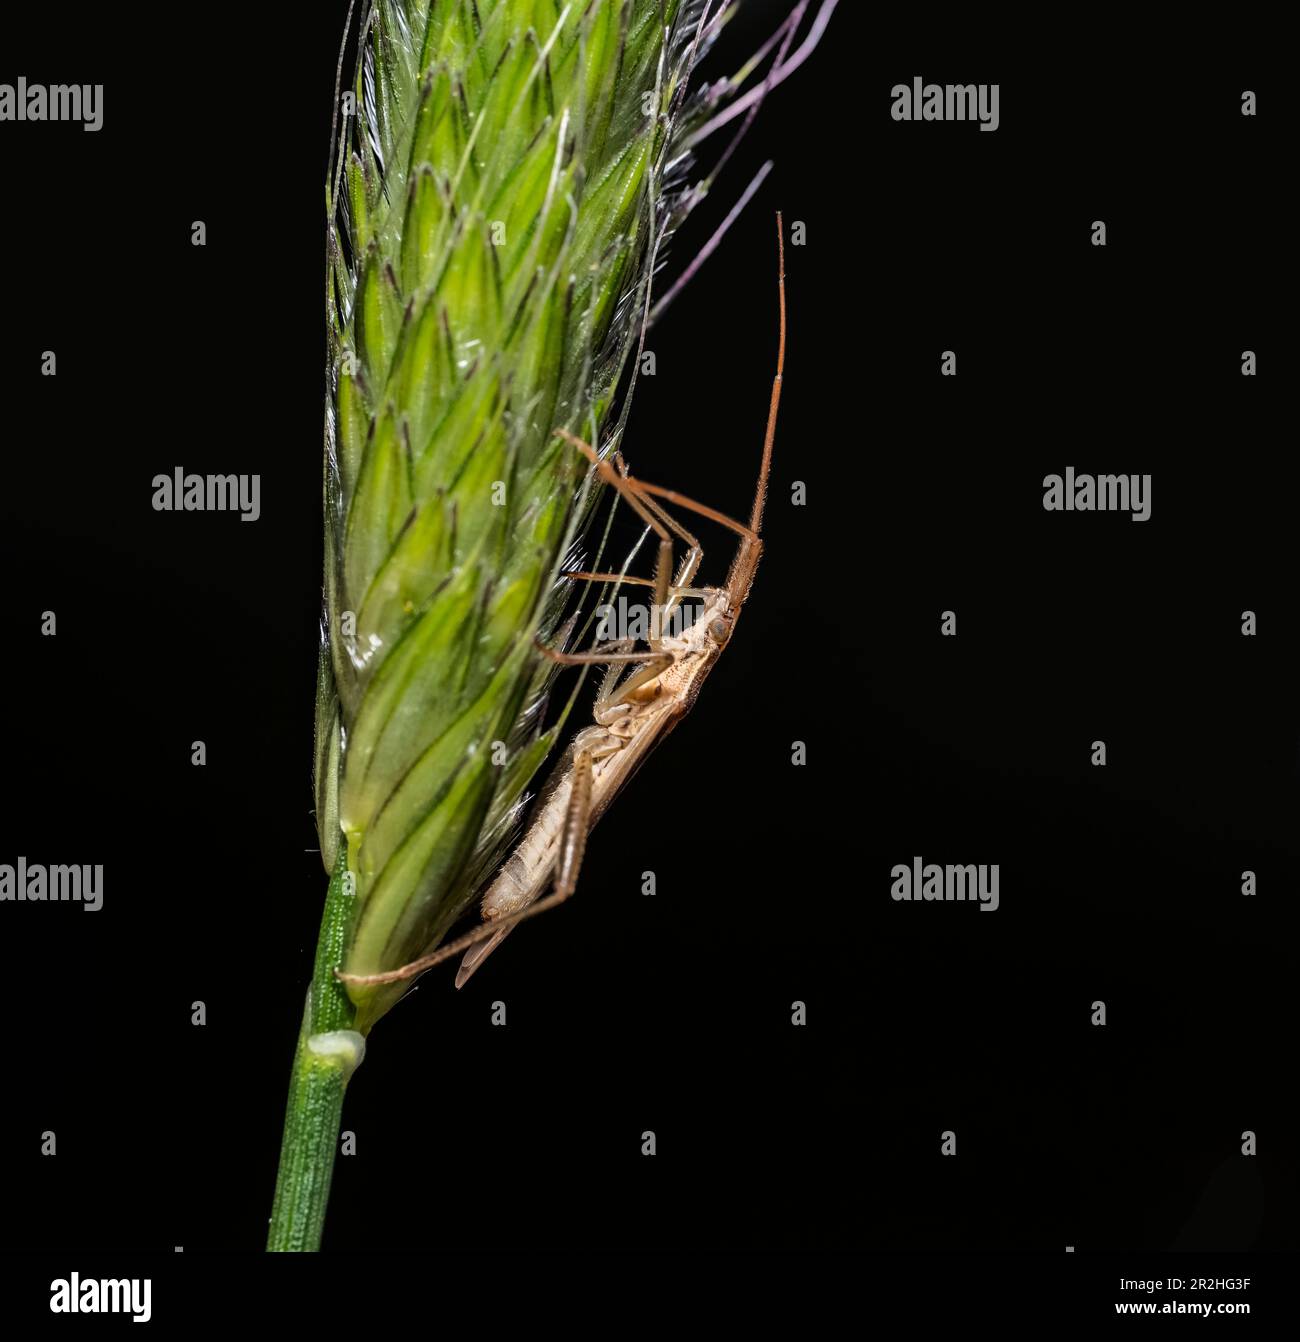 Sideways shot of a broad-headed bug at a grass ear in black back Stock Photo